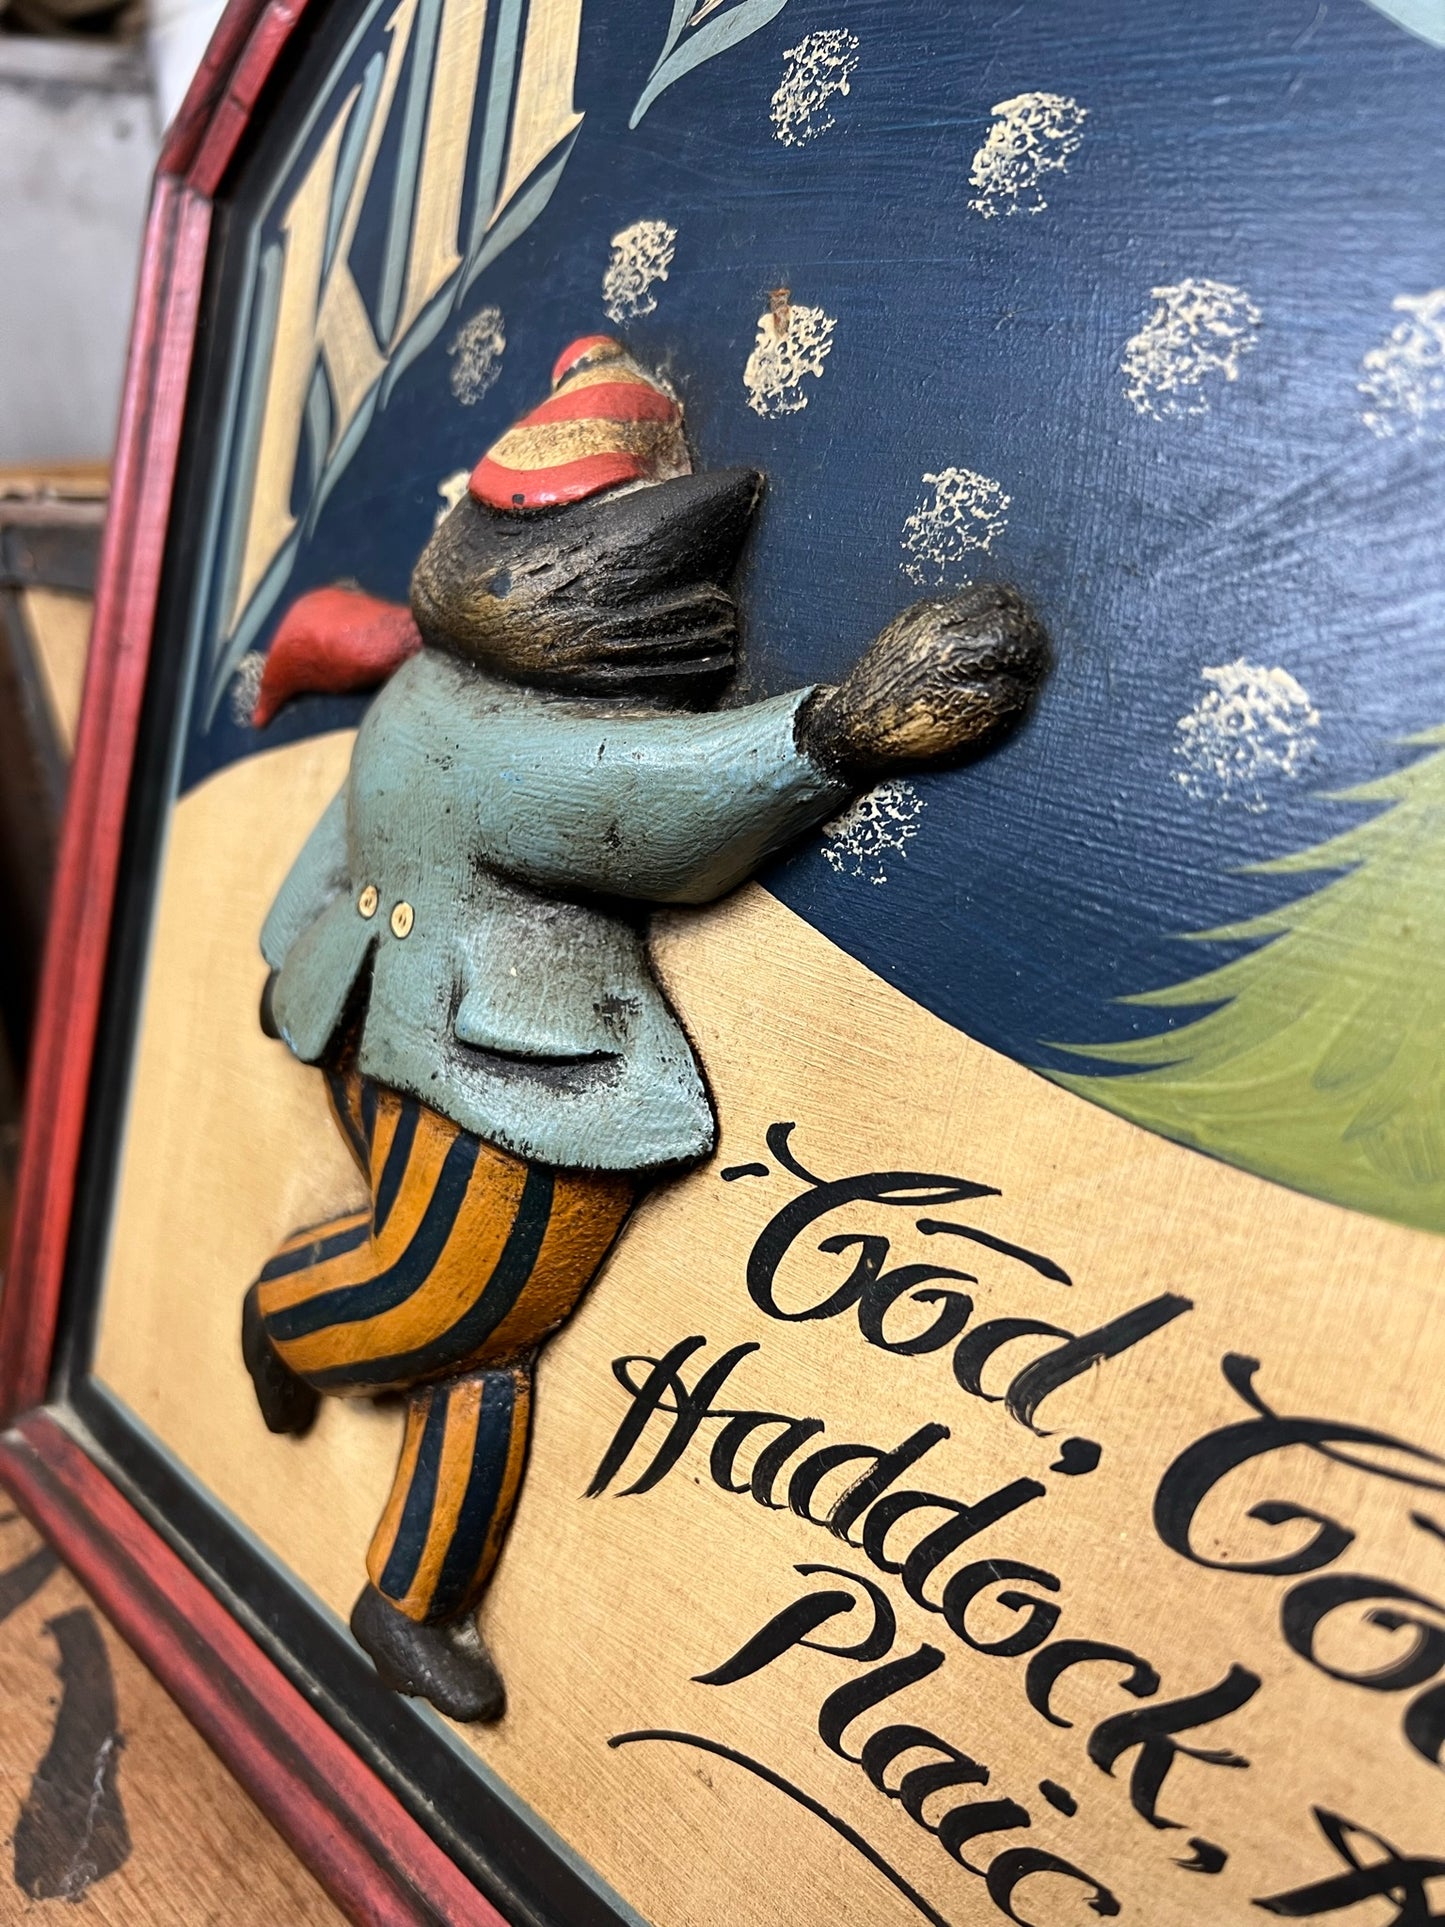 Vintage Wooden Hand Painted Kippers Advertising Sign Fisherman Farmhouse Decor Sign Restaurant Bar Display